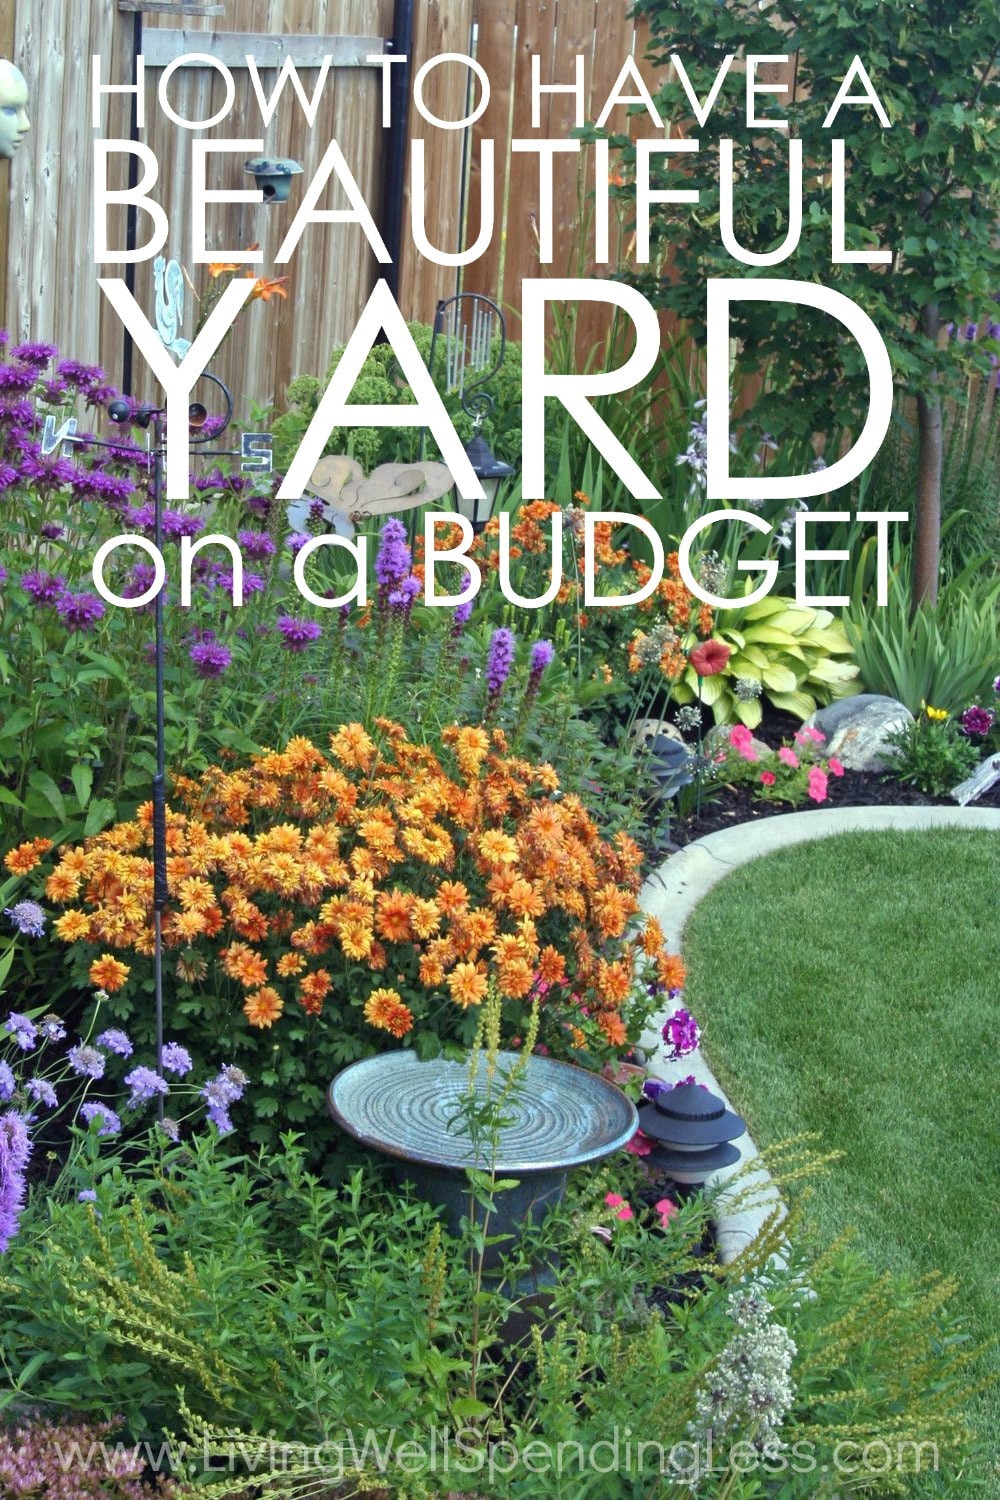 Cheap Backyard Landscaping Ideas
 How to Have a Beautiful Yard on a Bud